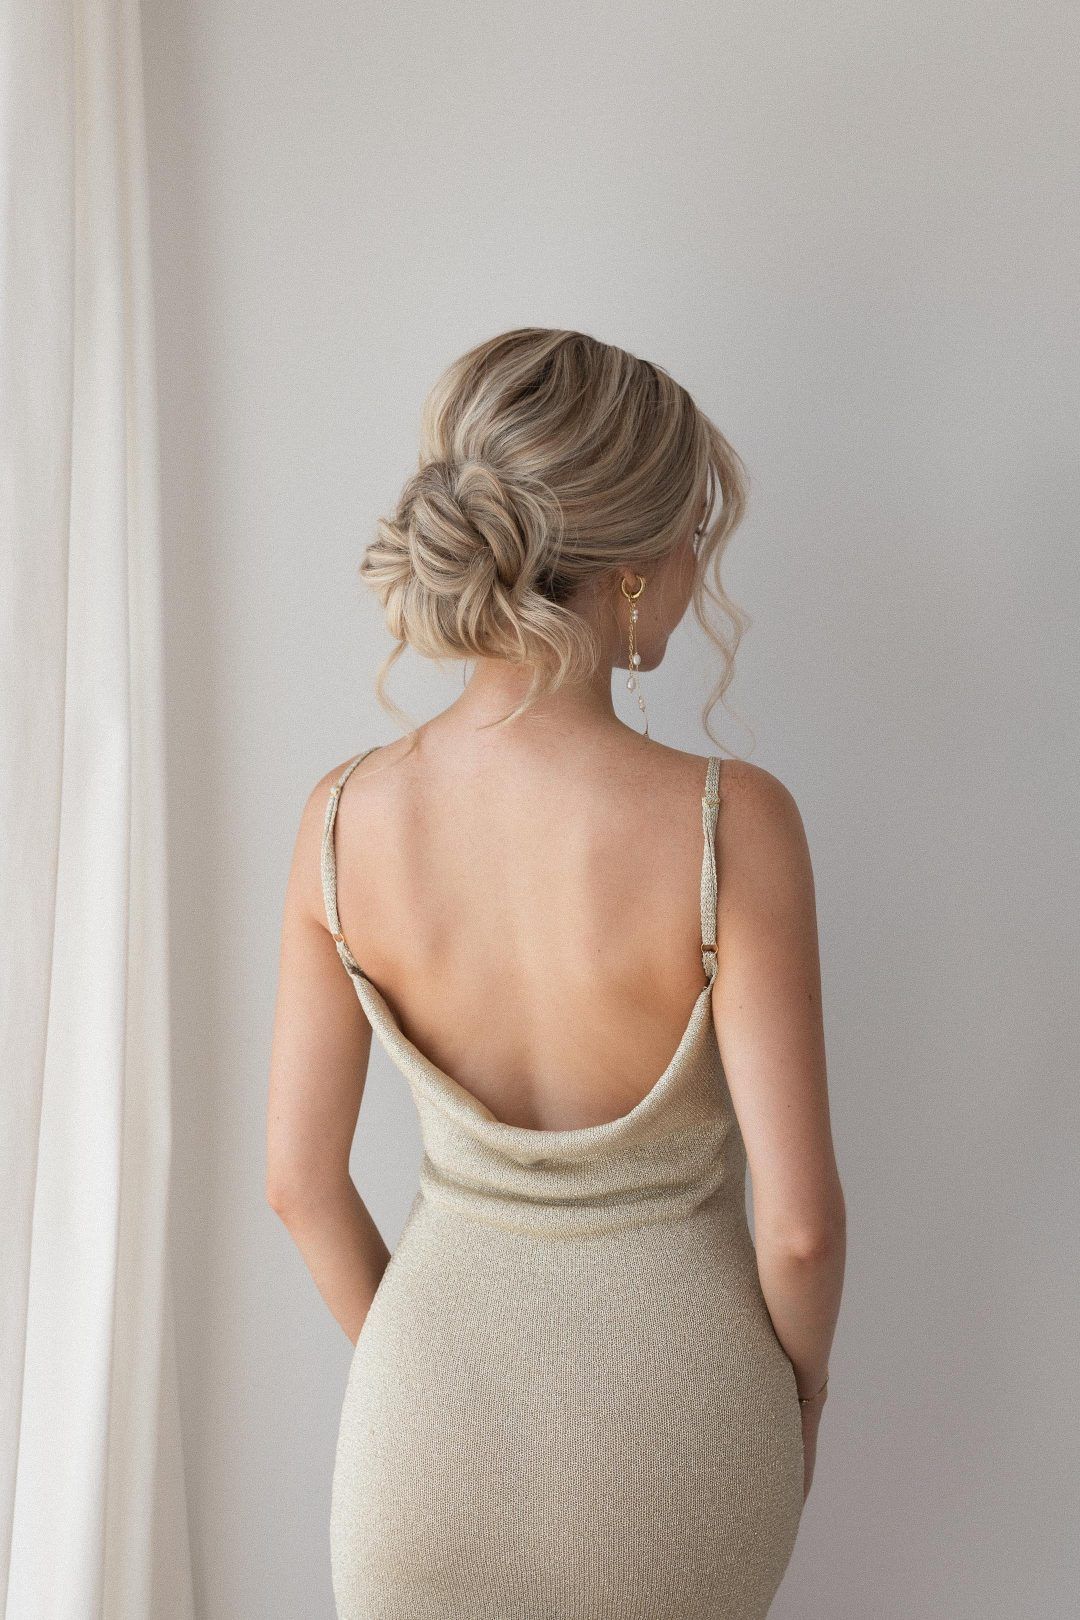 Elegant Wedding Hairstyles: Finding the Perfect Look for Your Big Day